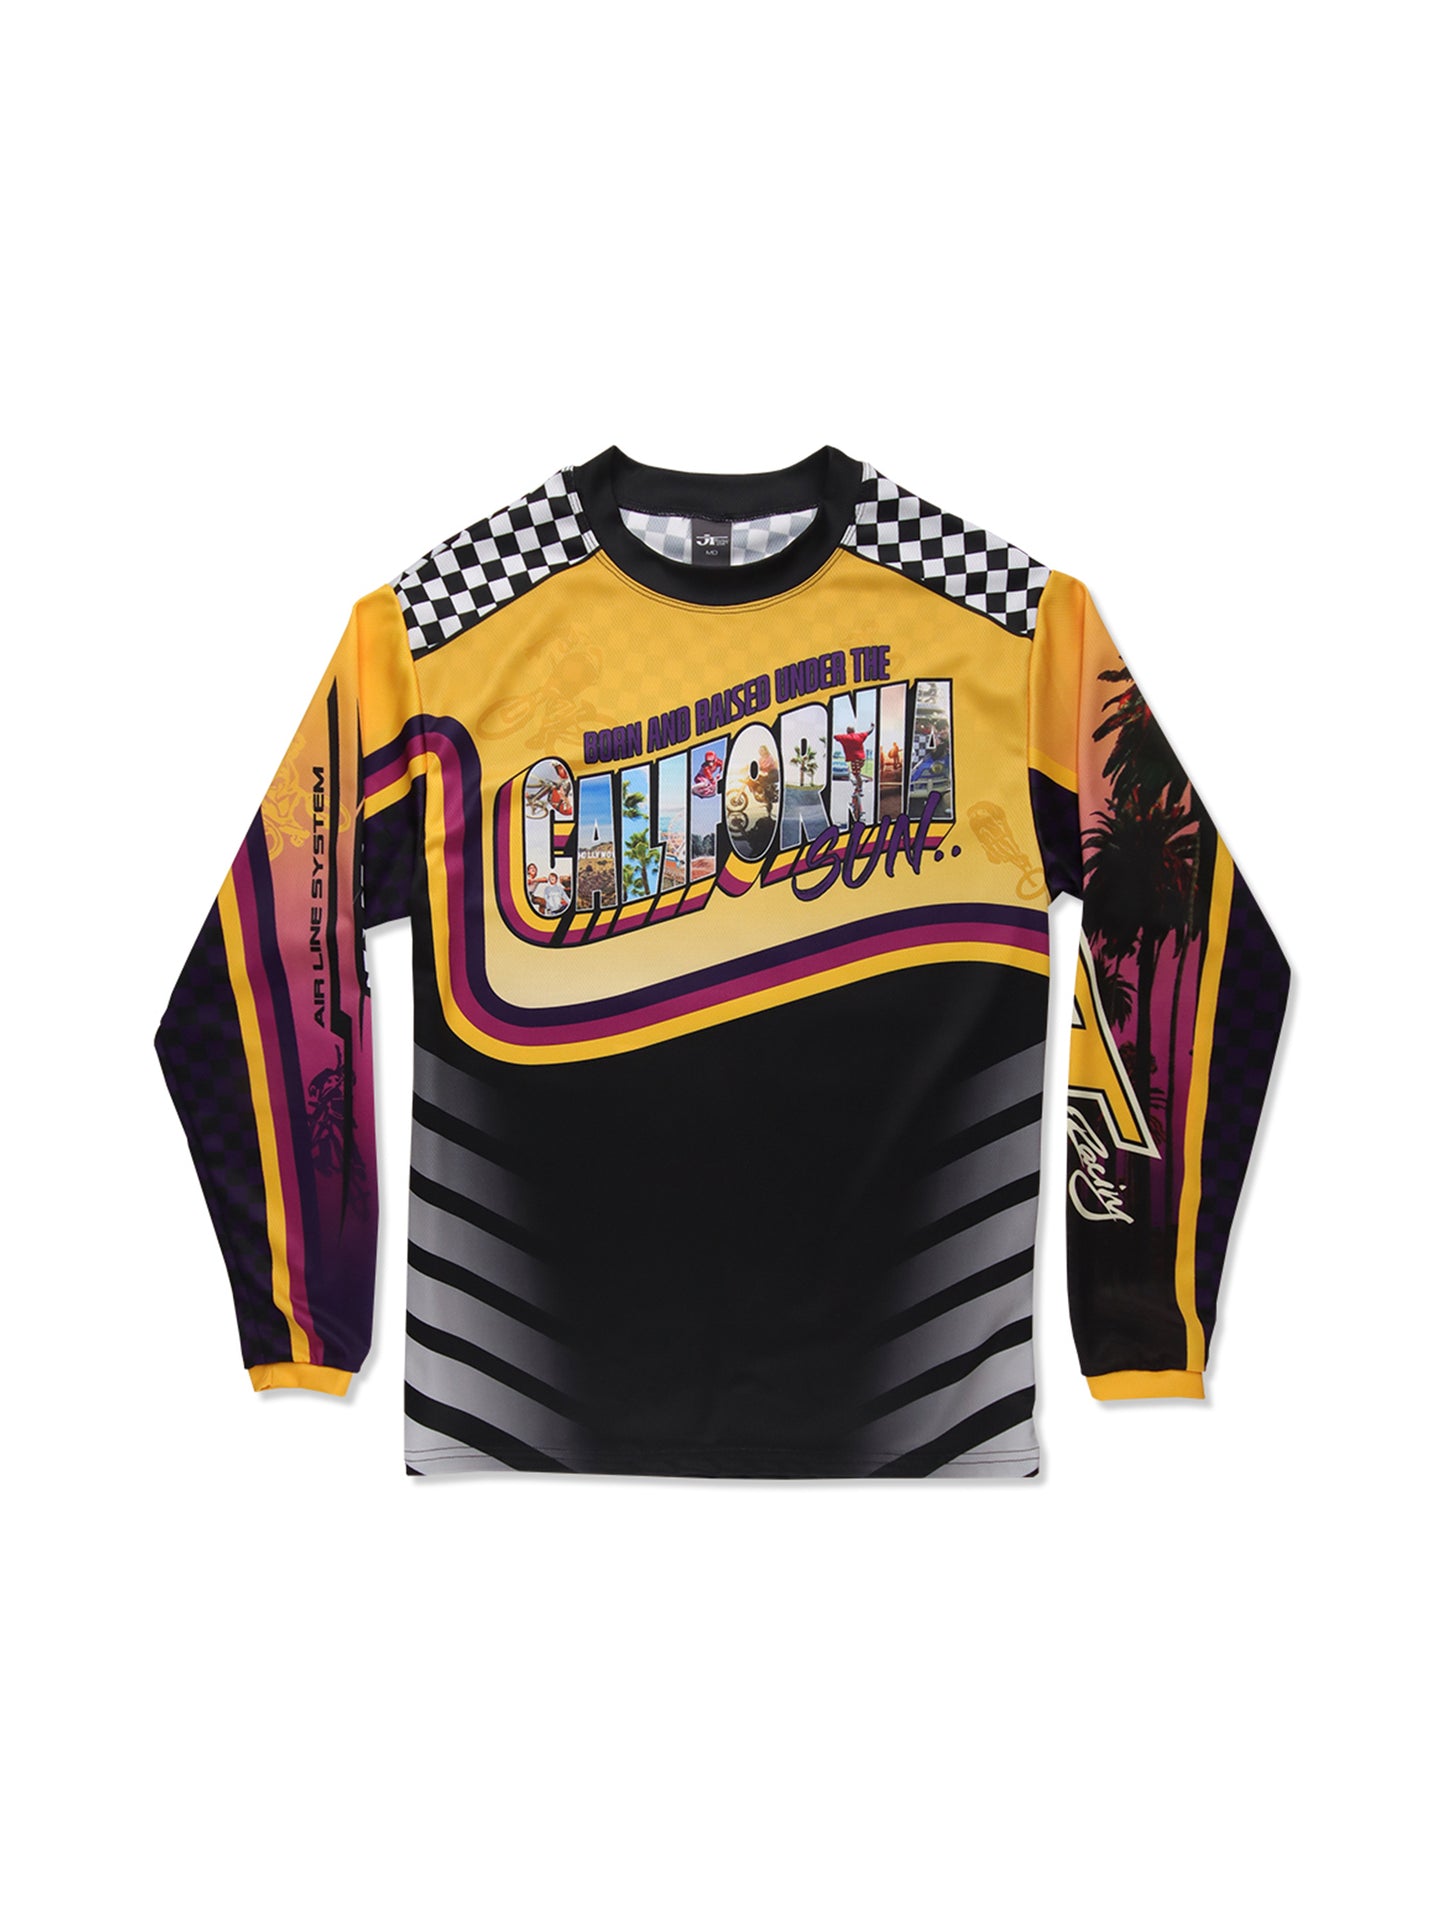 Born and Raised Under the California Sun Jersey - Champions Gold